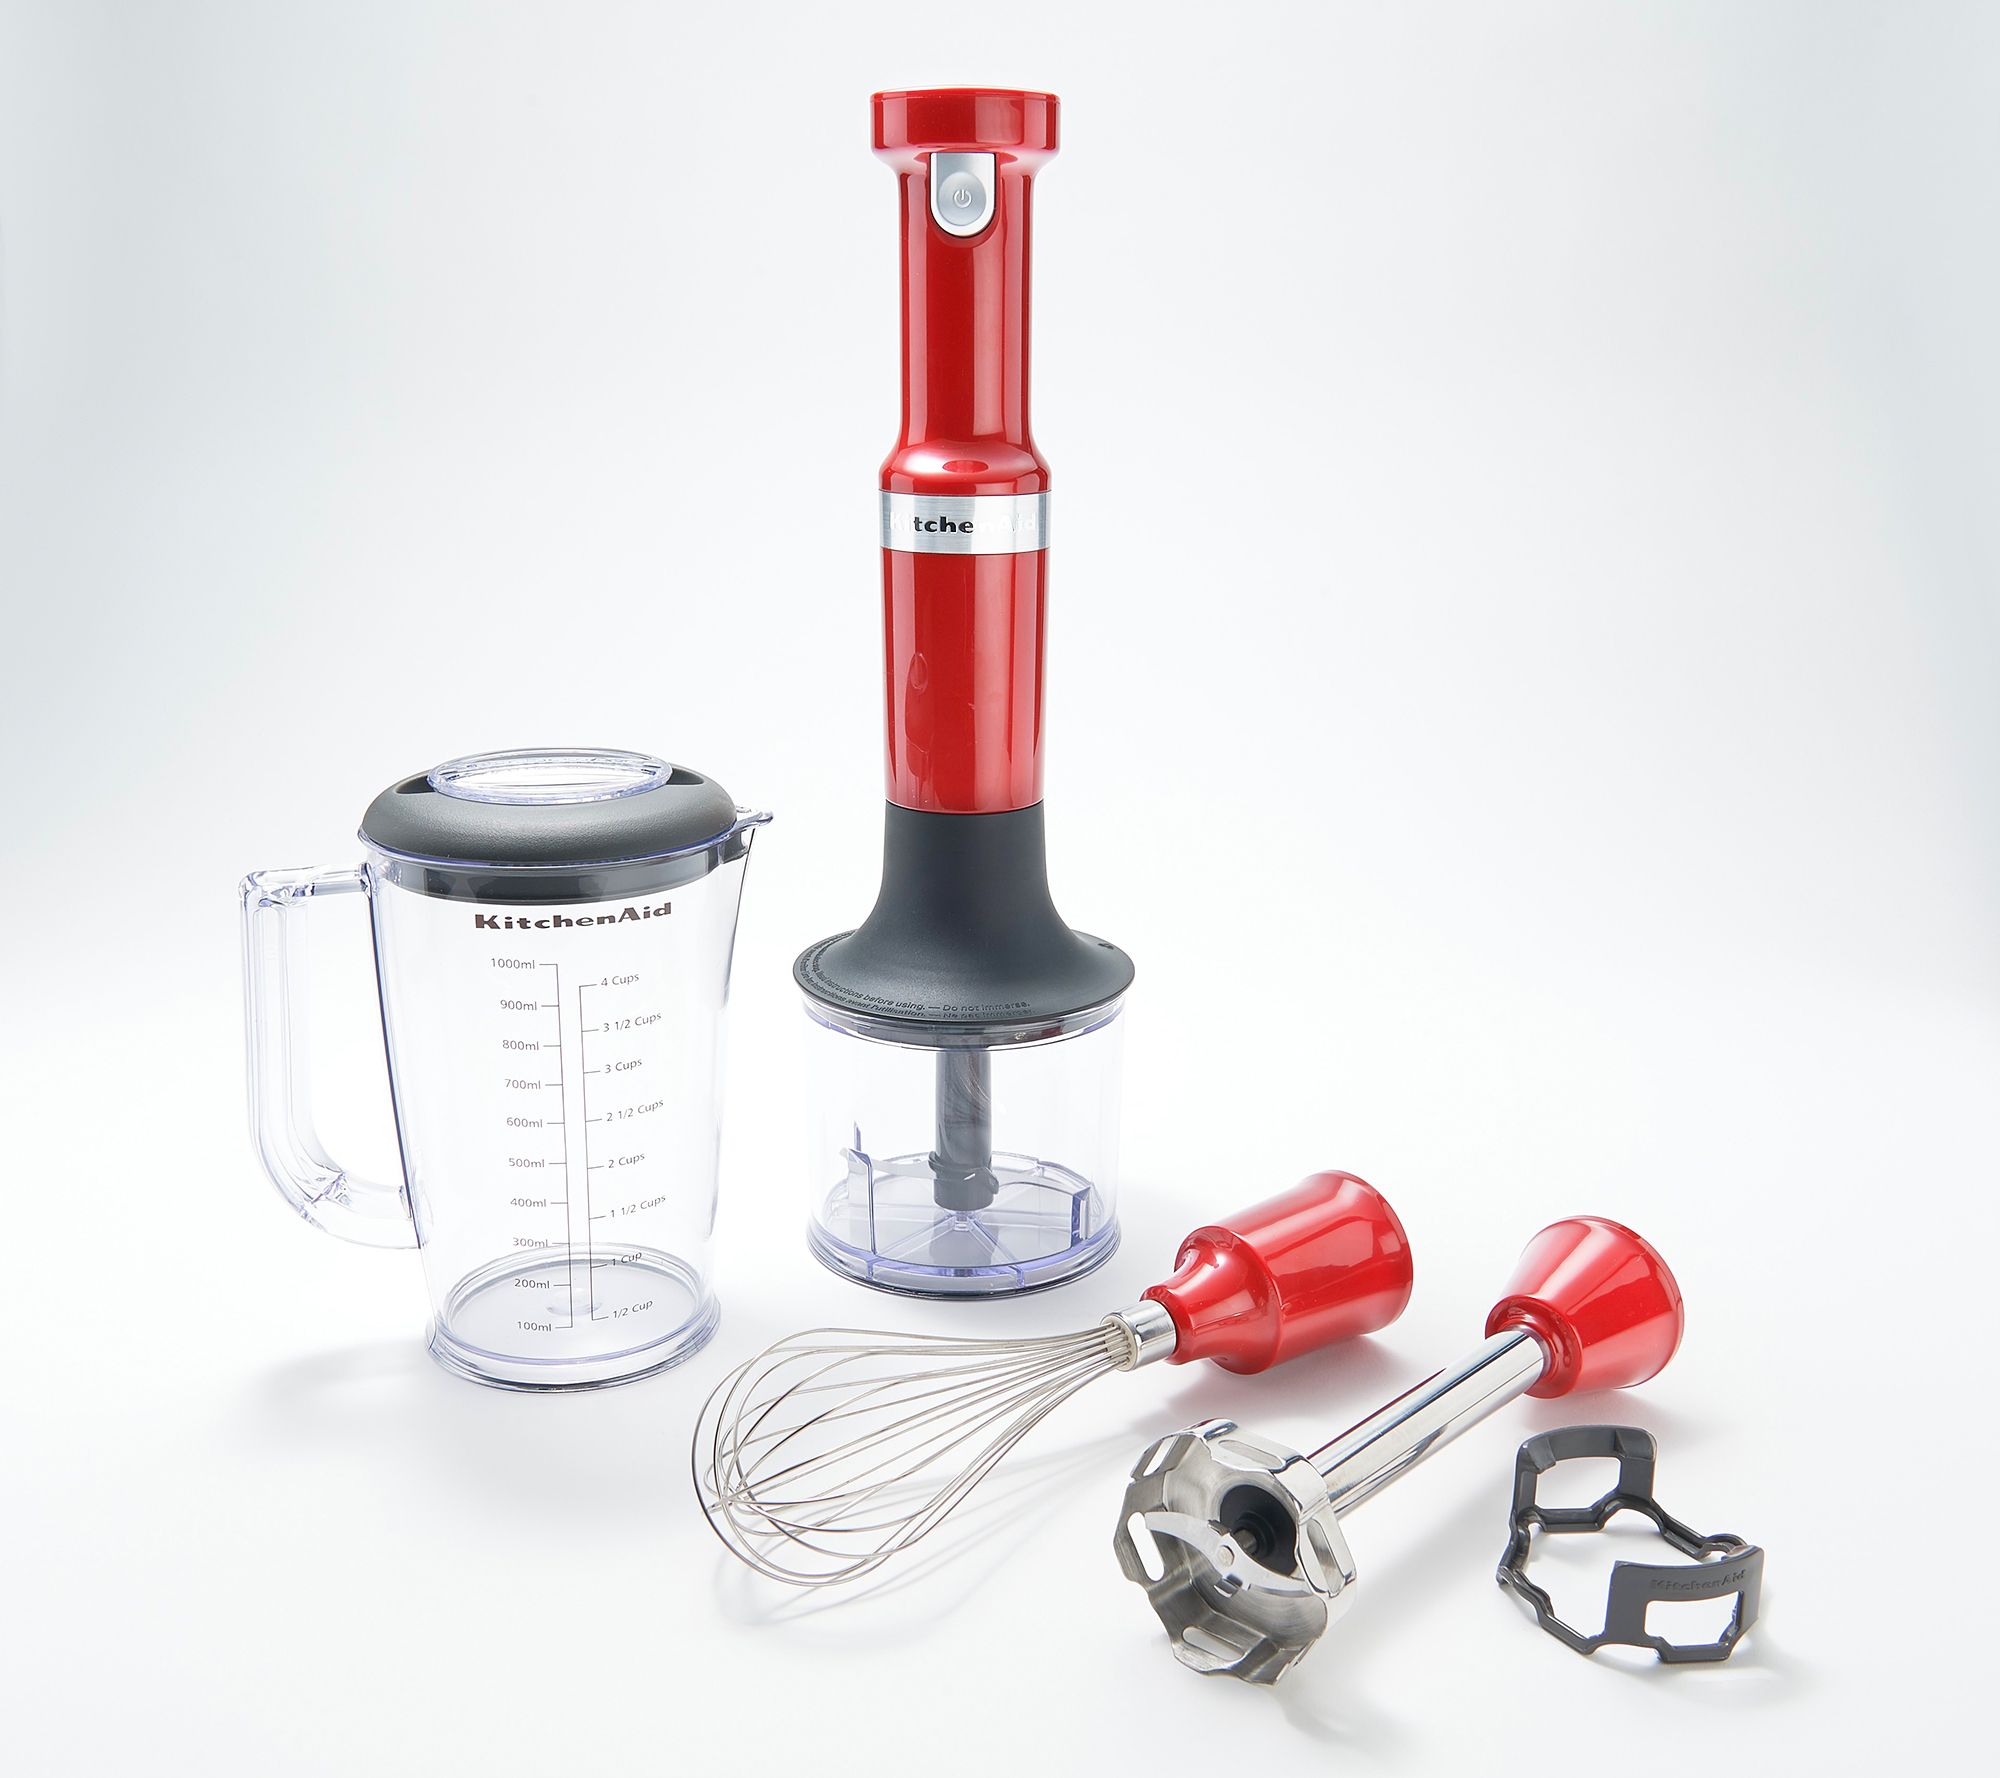 KitchenAid Cordless Rechargeable Variable-Speed Hand Blender